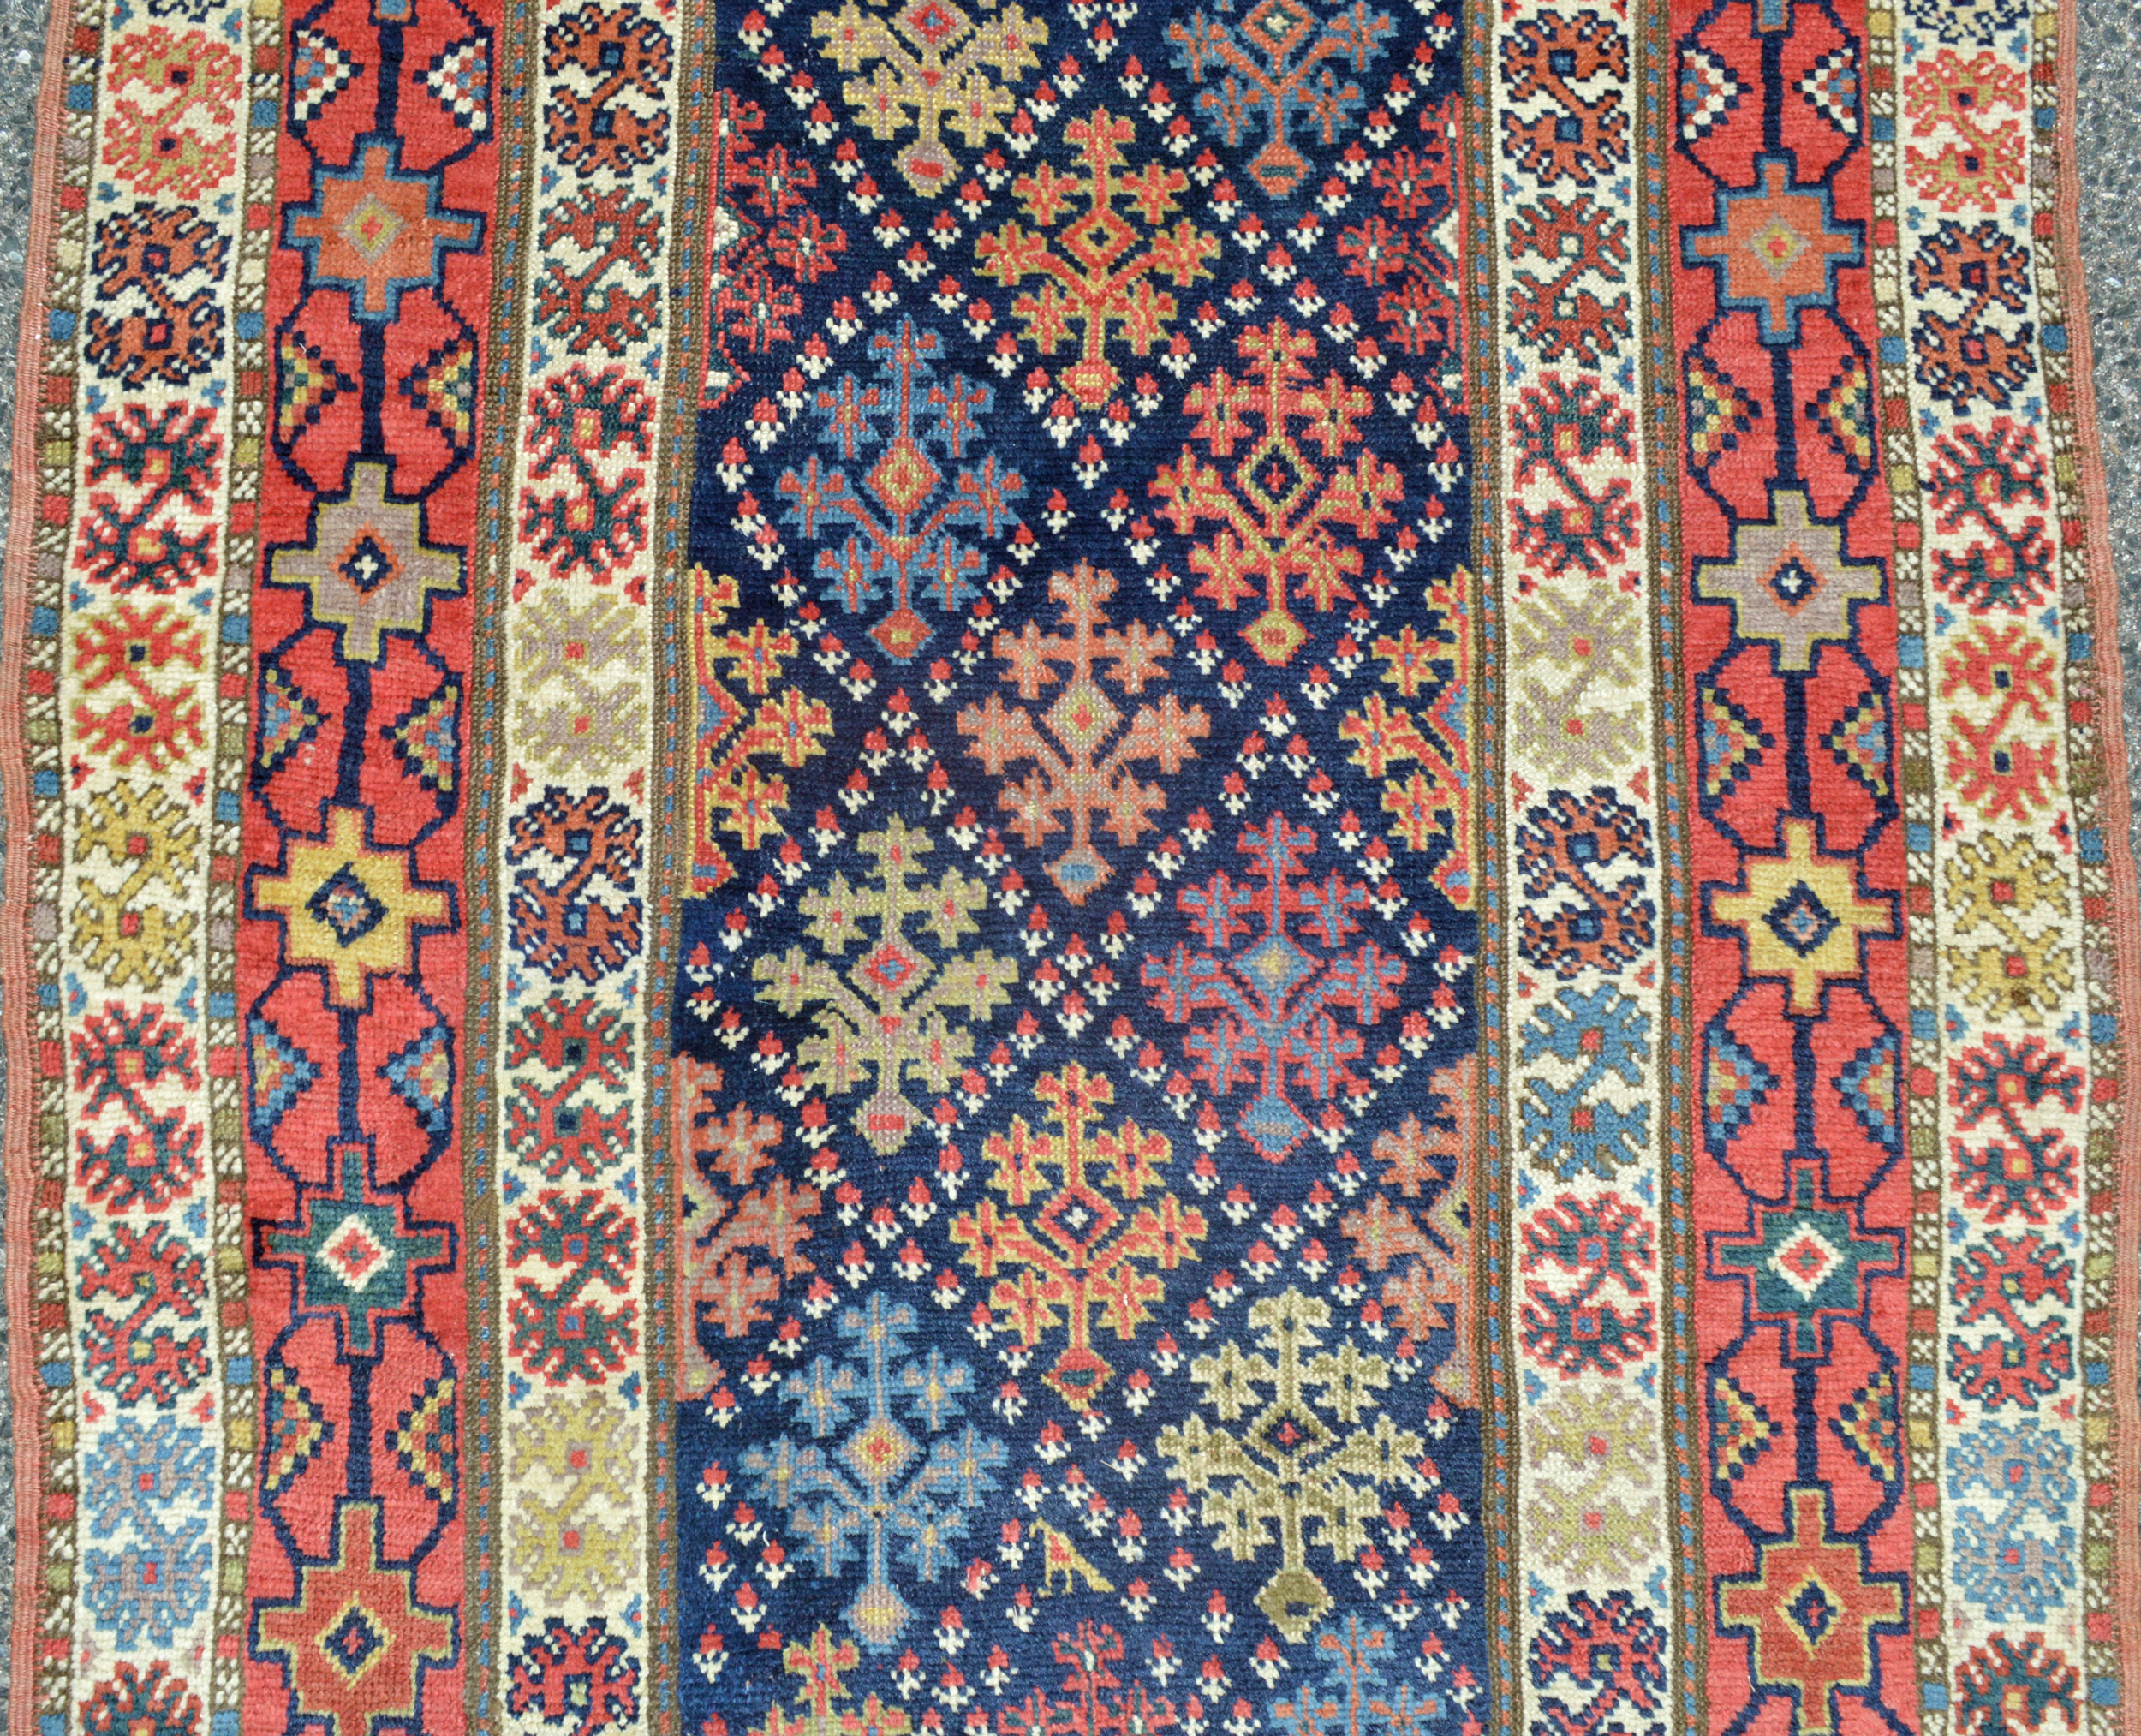 Detail of an antique Oriental runner rug with a stylized lattice and shrub design on a navy field that is framed by a red, geometric design border, Douglas Stock Gallery, antique Oriental runners, antique runner rugs Boston,MA area